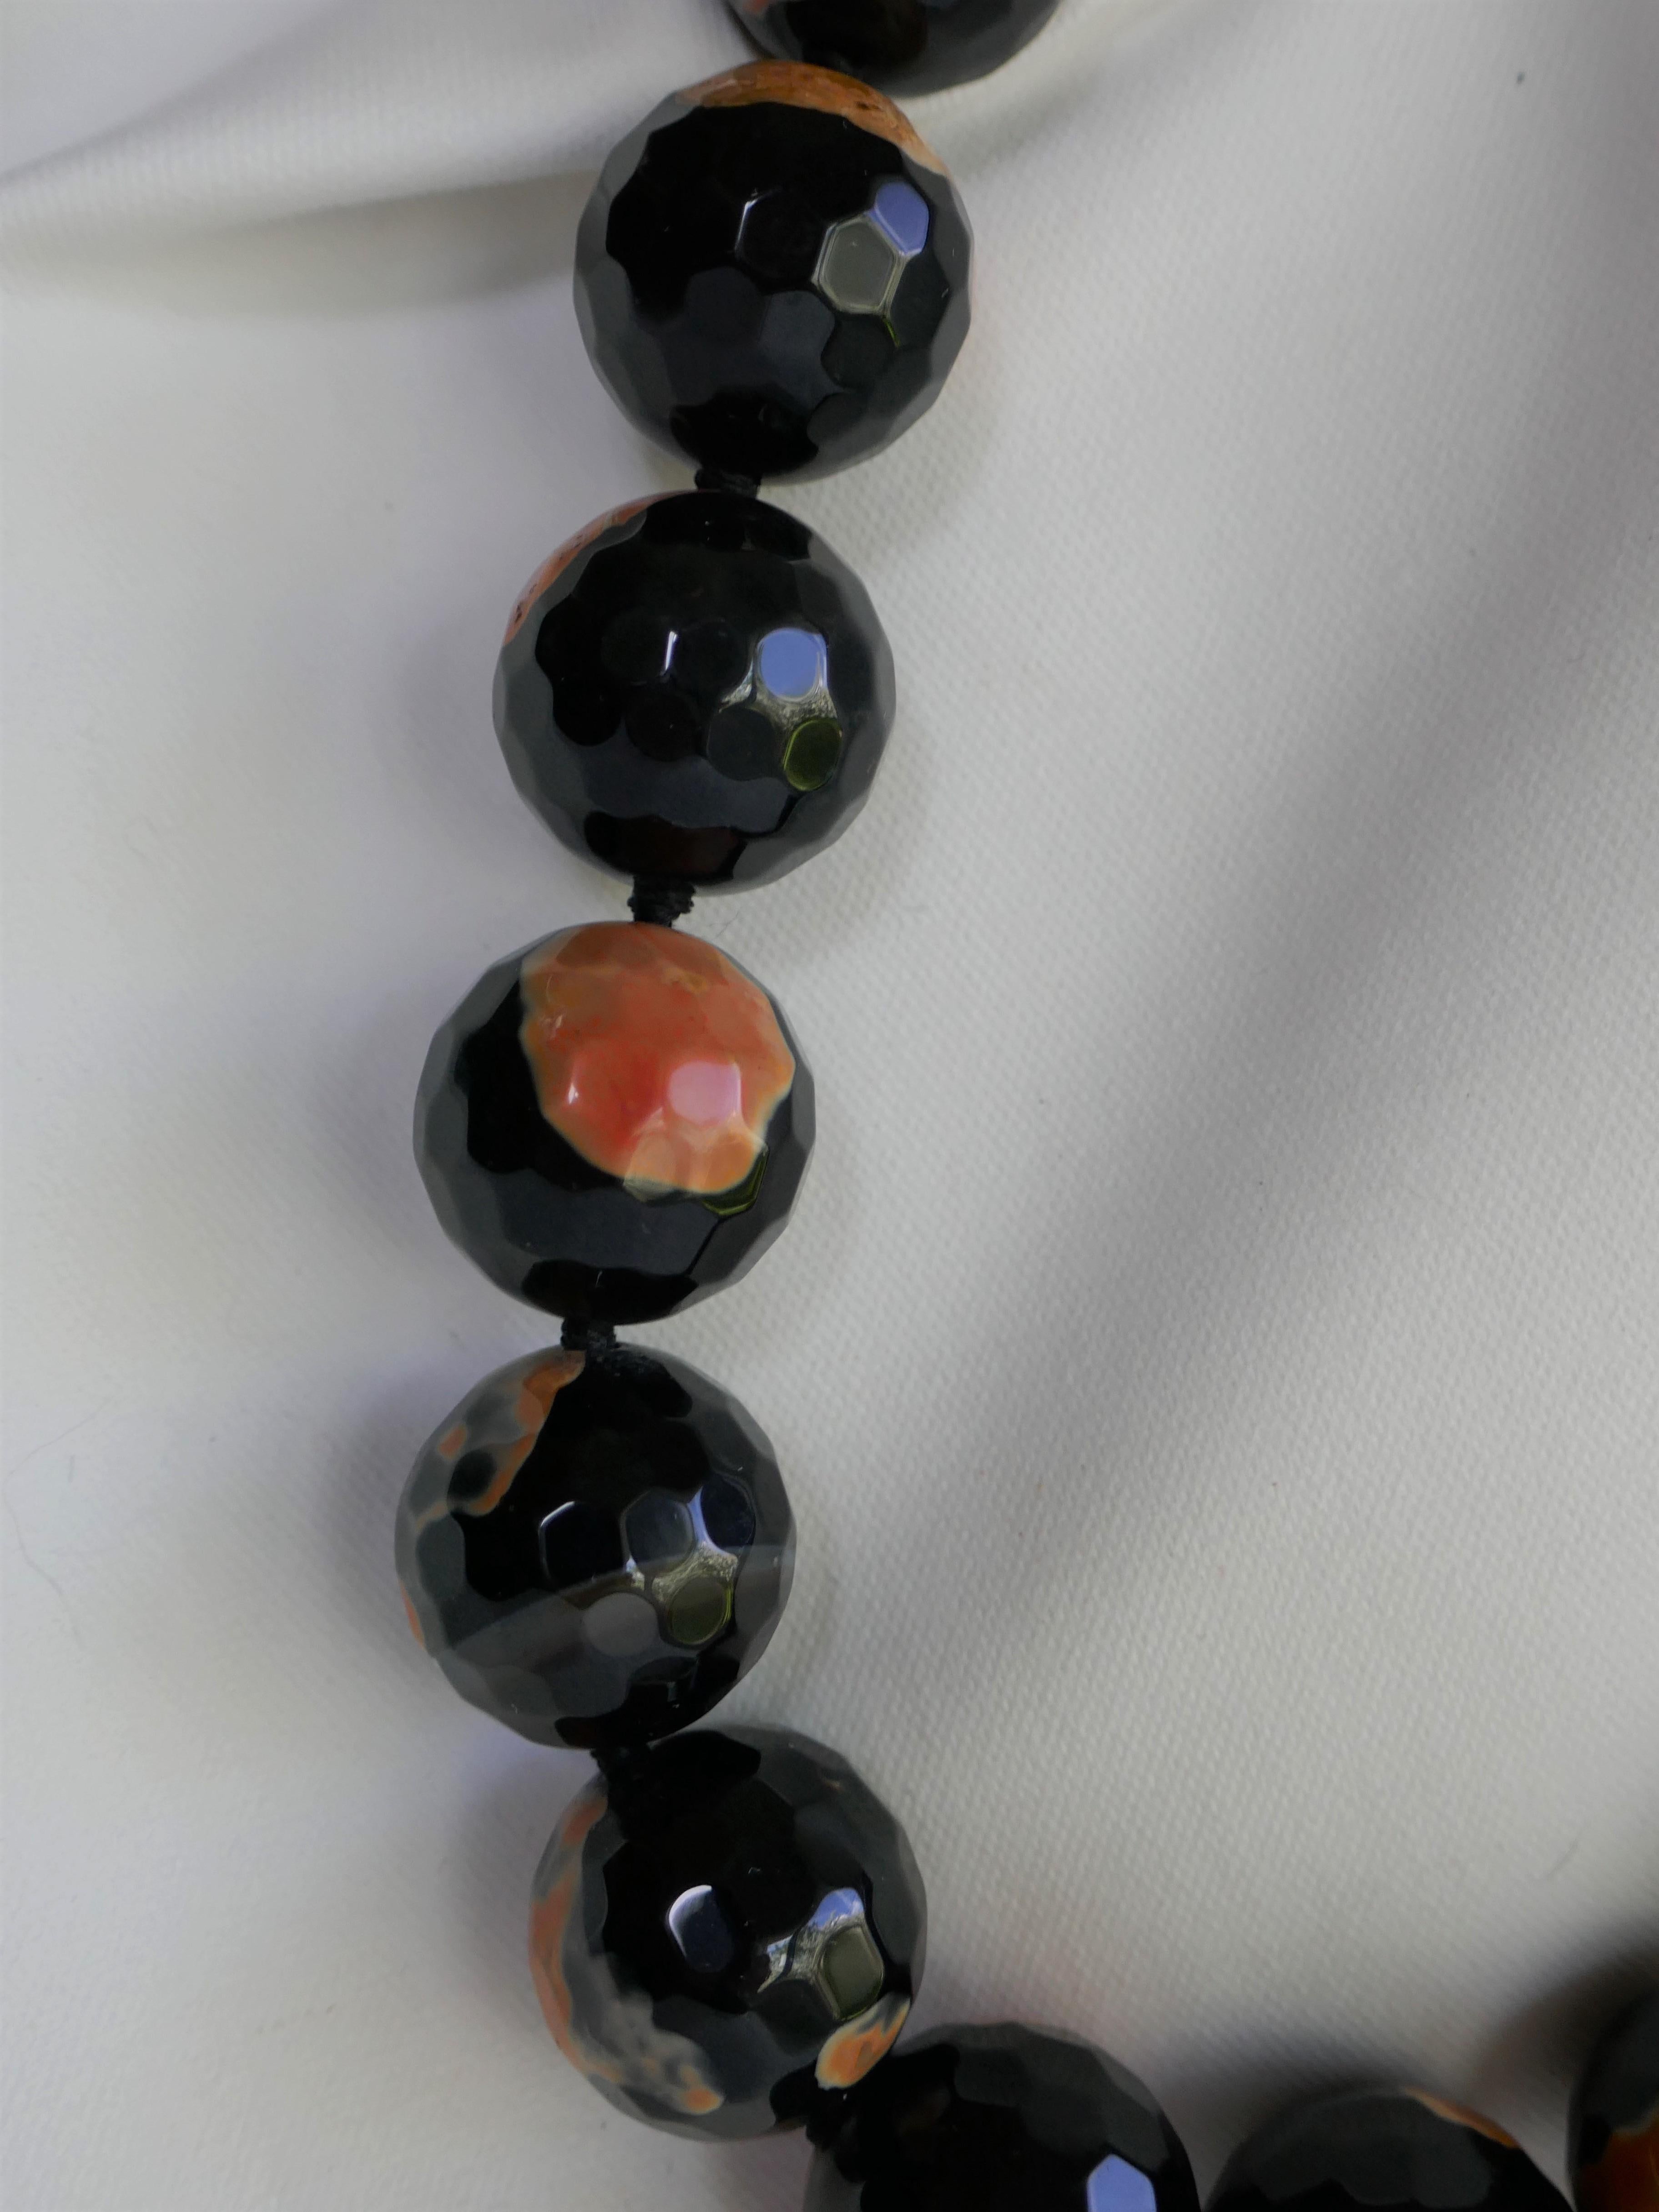 This 20mm beads faceted fire agate necklace is classic,  modern and makes a statement.  This particular fire agate has orange coral hues bead throughout the bead. The necklace looks amazing on.  It is individually knotted with black silk thread. The